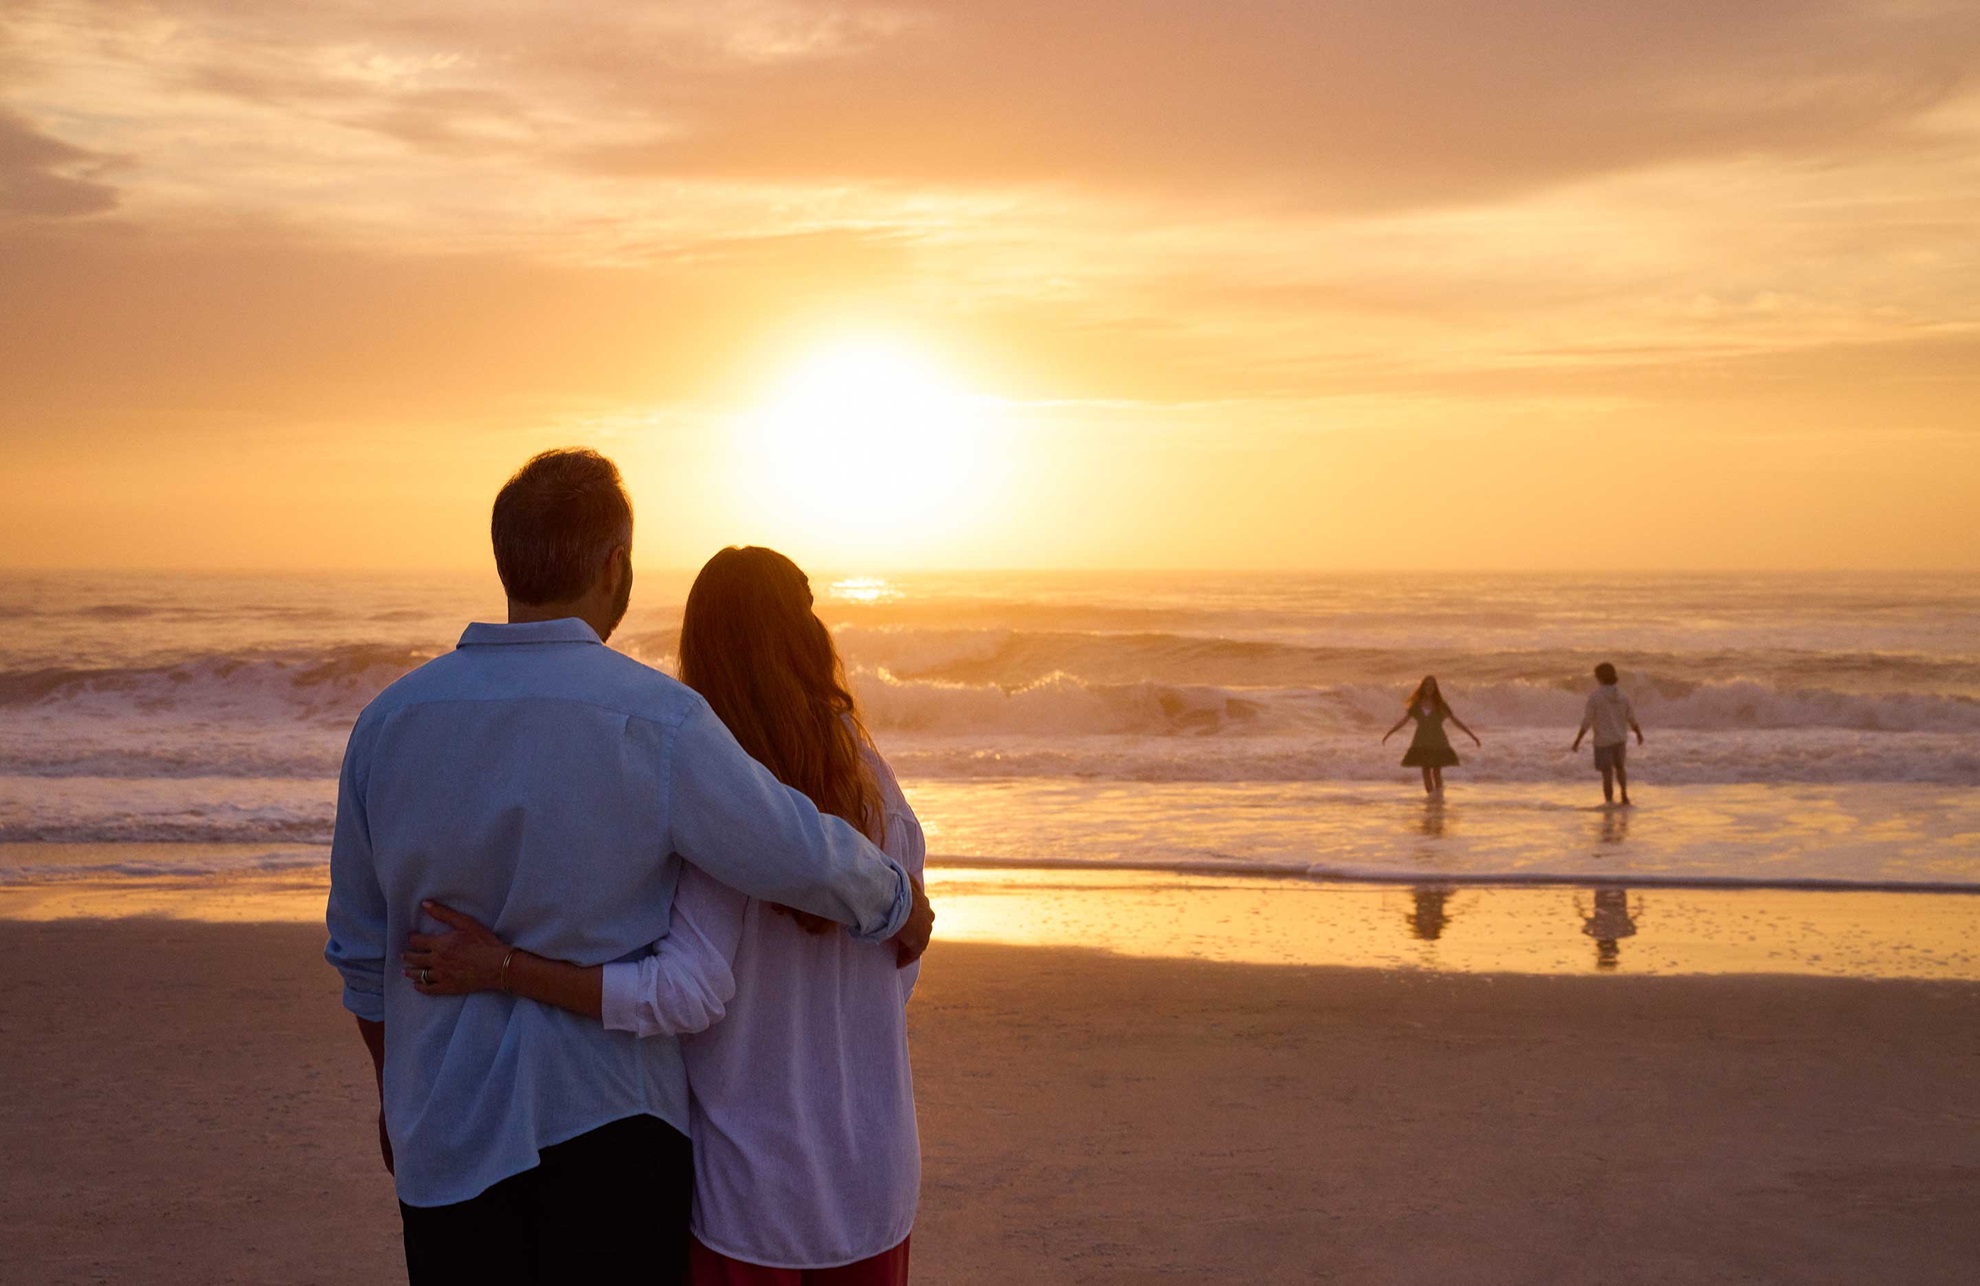 Couple looking at the sunset over the ocean.